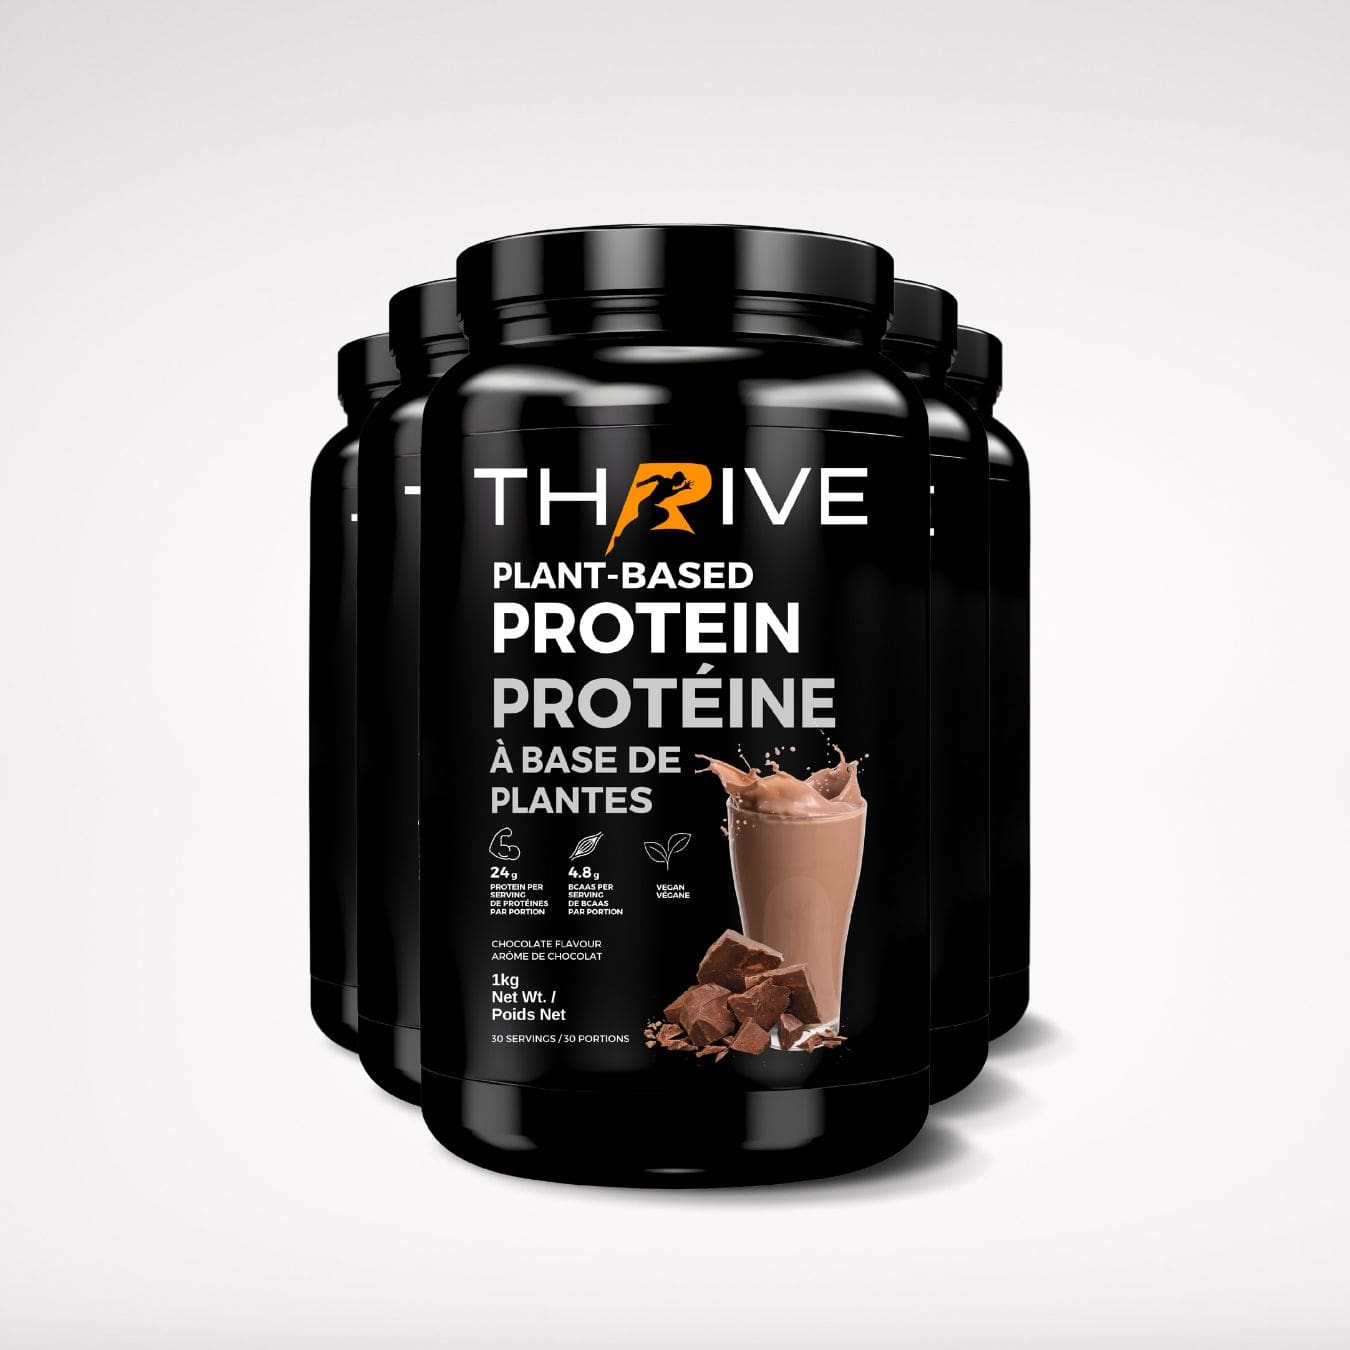 Thrive Plant-Based Protein Chocolate (5 Units)